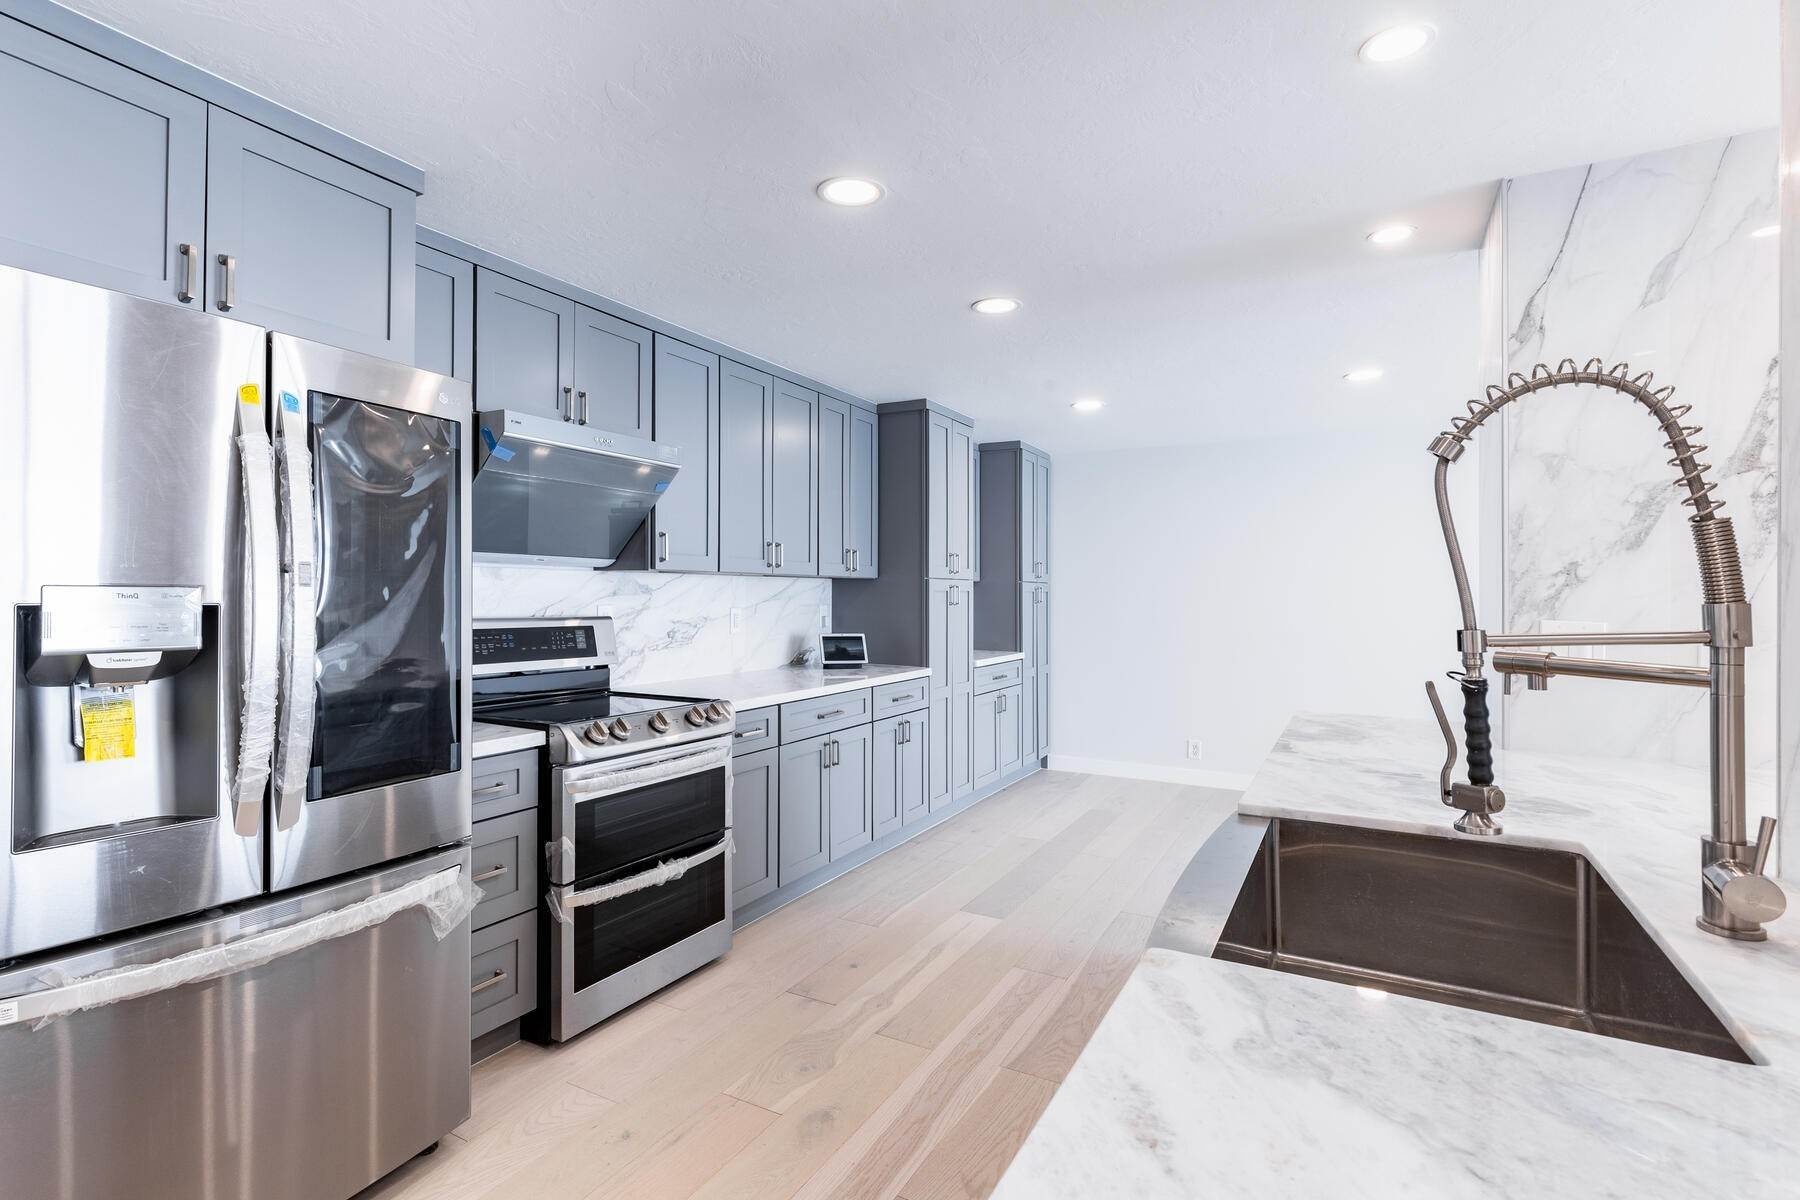 3. Condominiums for Sale at Remodeled Highrise Condo With Incredible Panoramic Views of the Entire Salt Lake 875 S Donner Way, Unit 1103 Salt Lake City, Utah 84108 United States